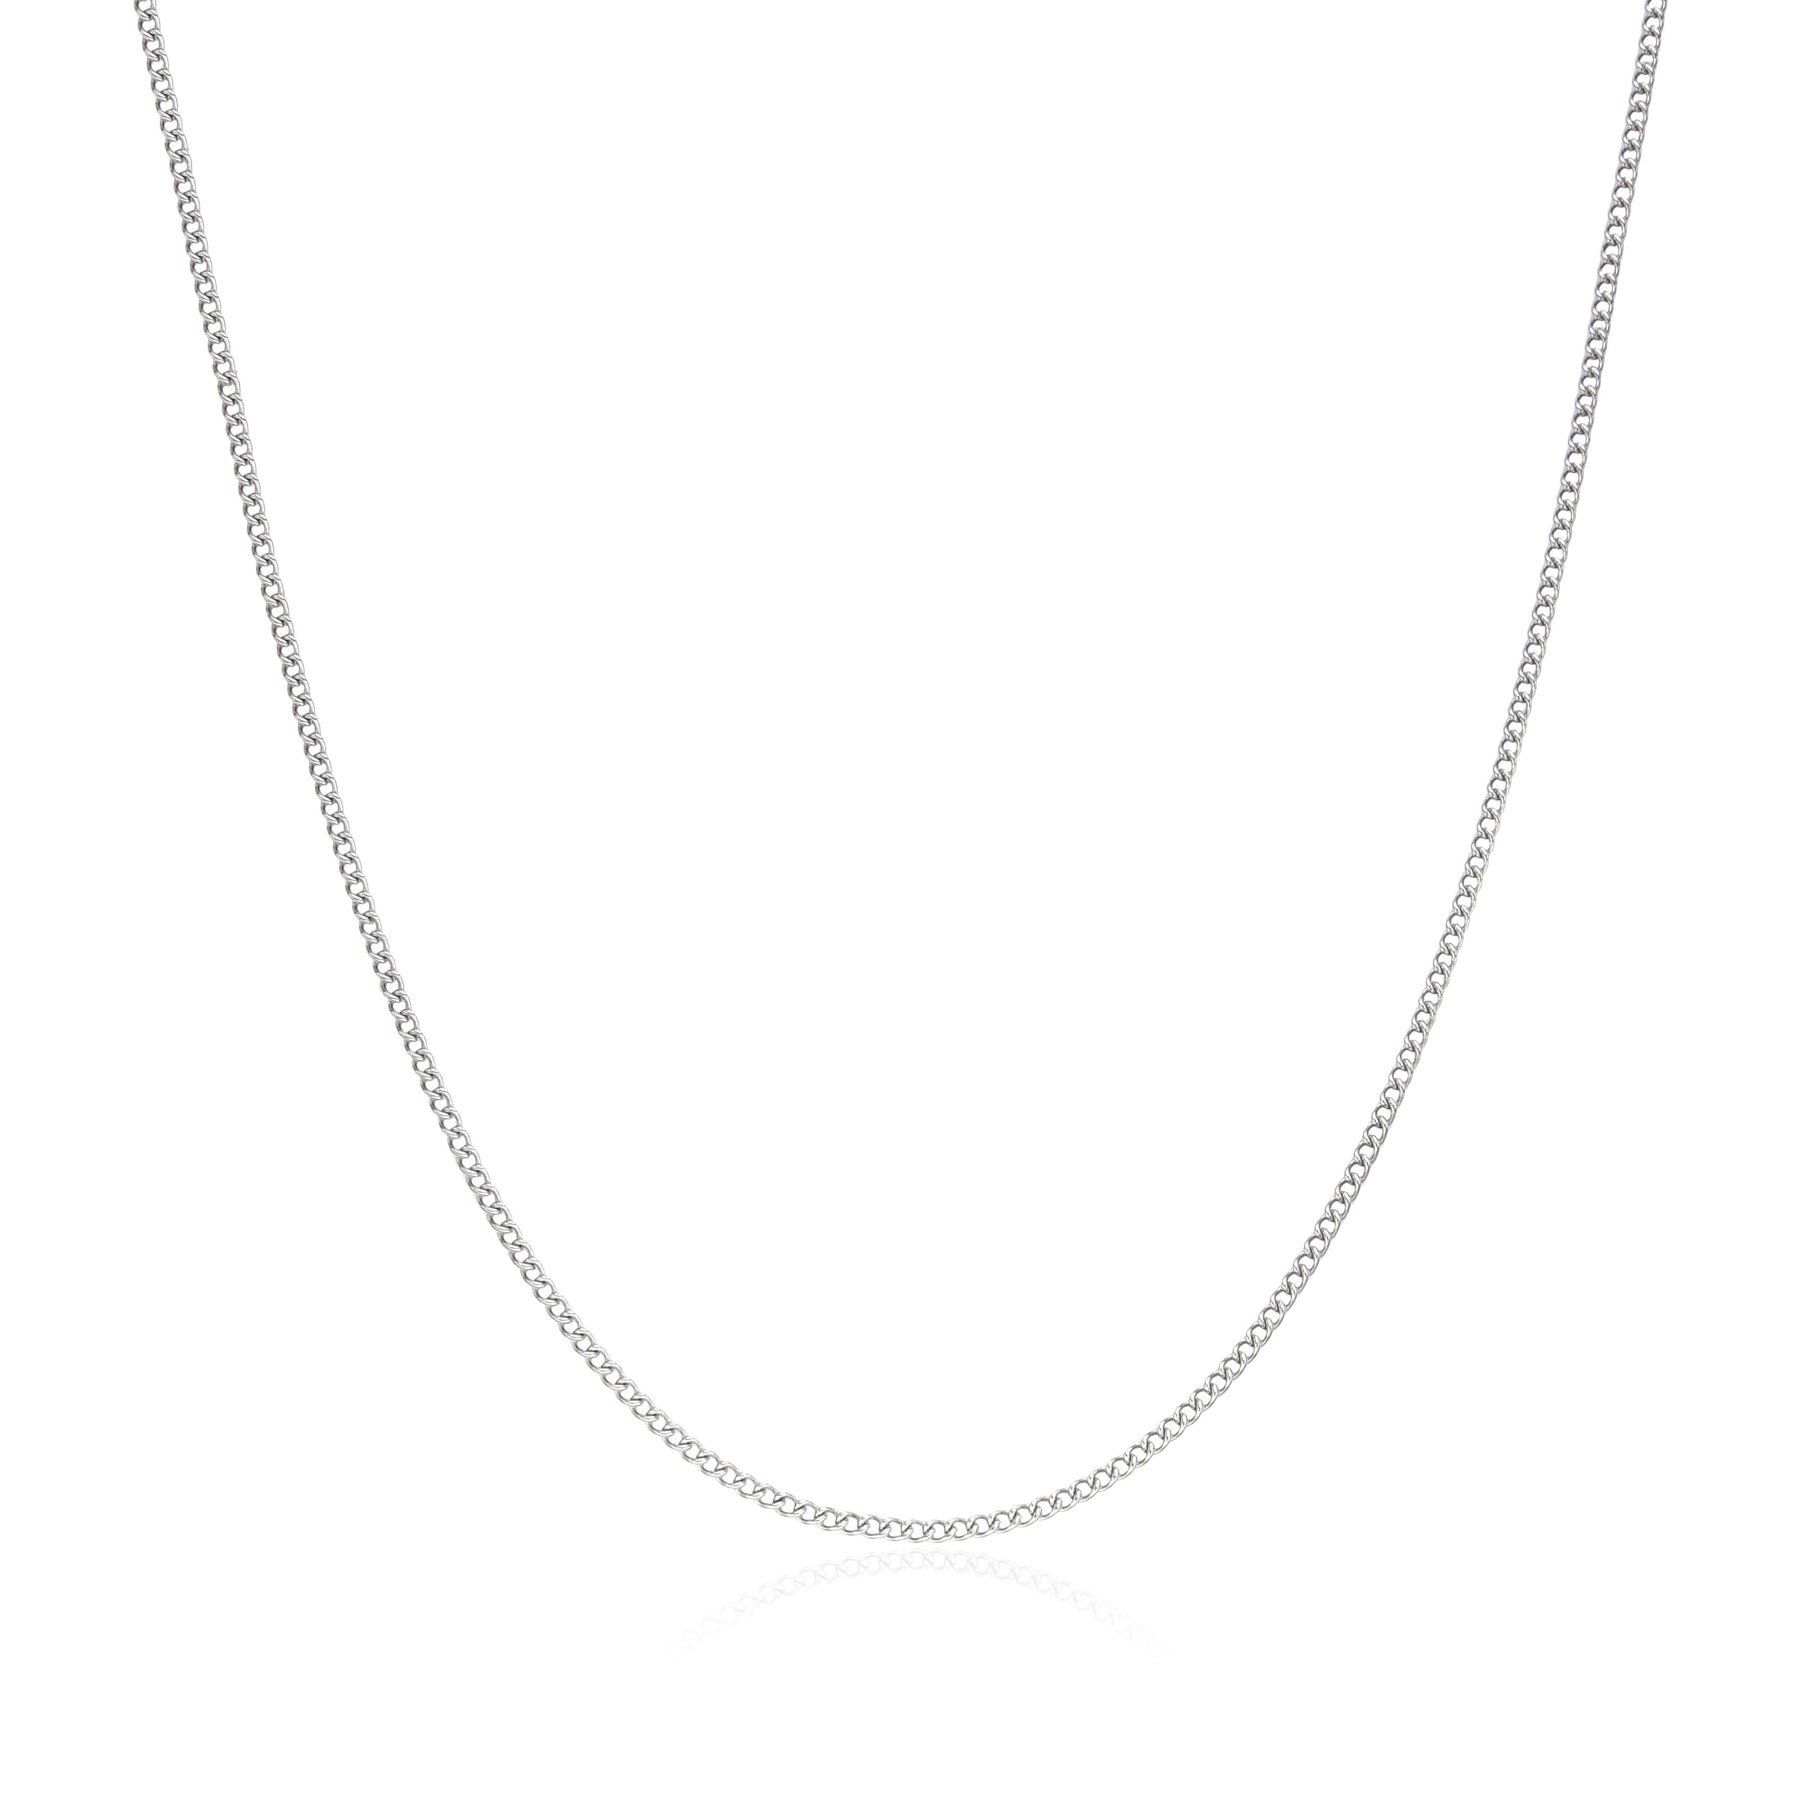 Connell Chain (Silver) 2mm